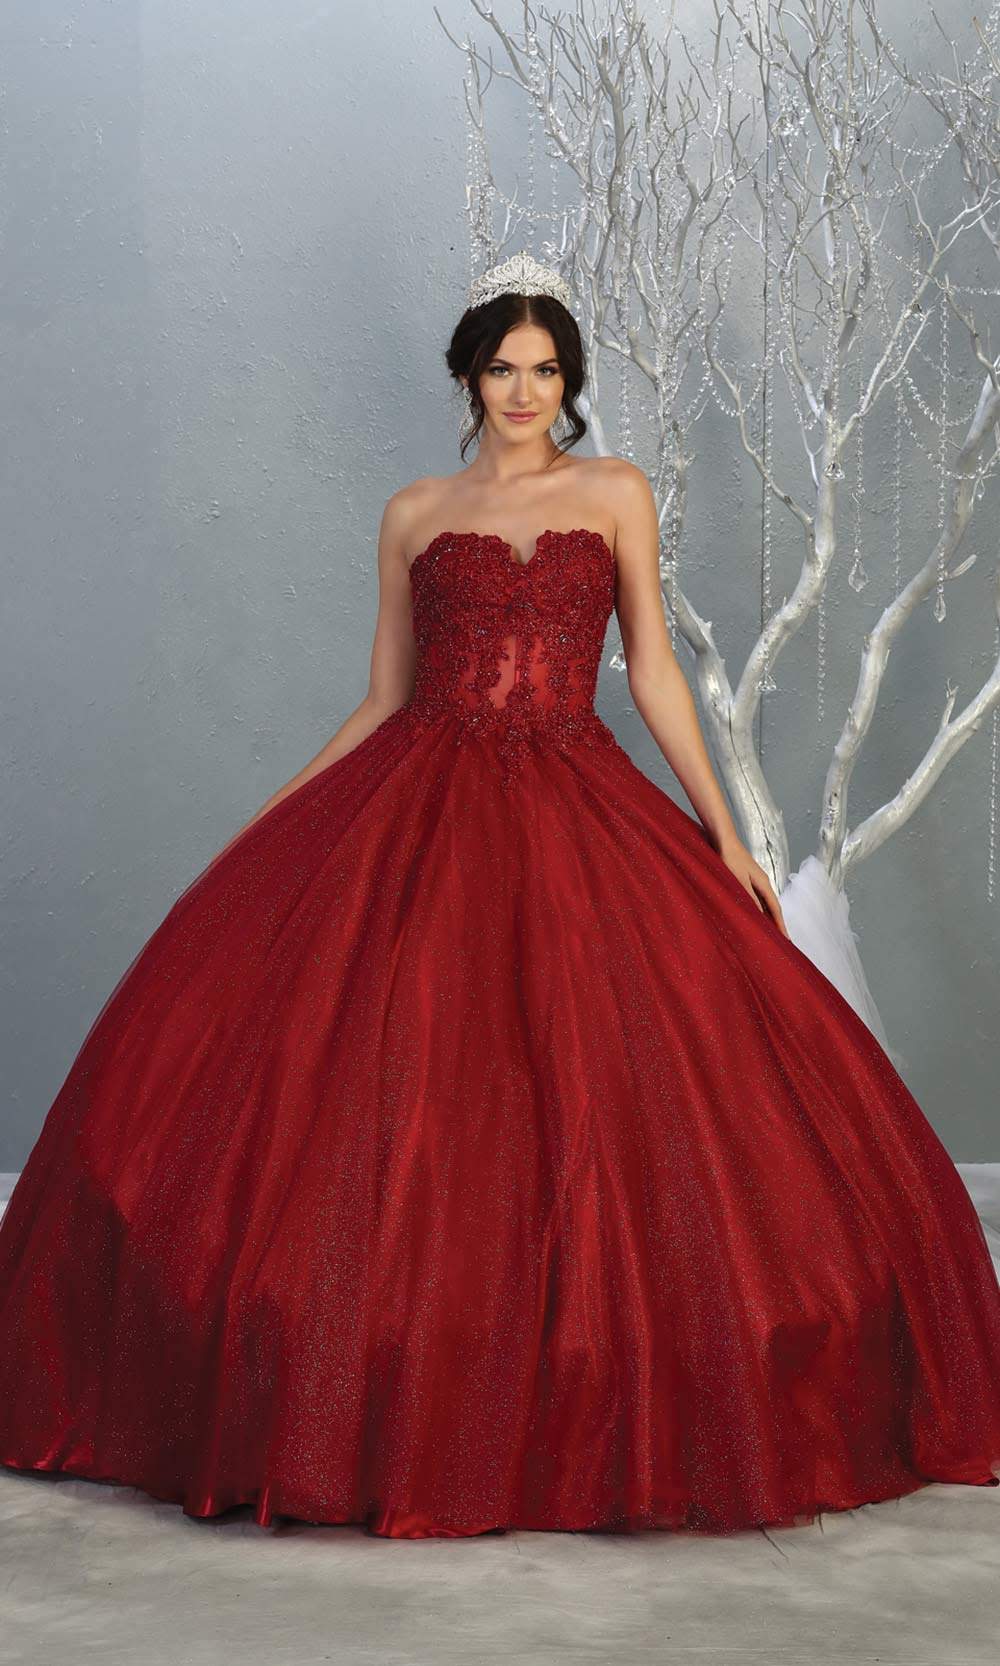 Mayqueen LK141 burgundy red quinceanera strapless ball gown w/lace detail. This dark red ball gown is perfect for engagement dress, wedding reception, indowestern party gown, sweet 16, debut, sweet 15, sweet 18. Plus sizes available for ballgowns